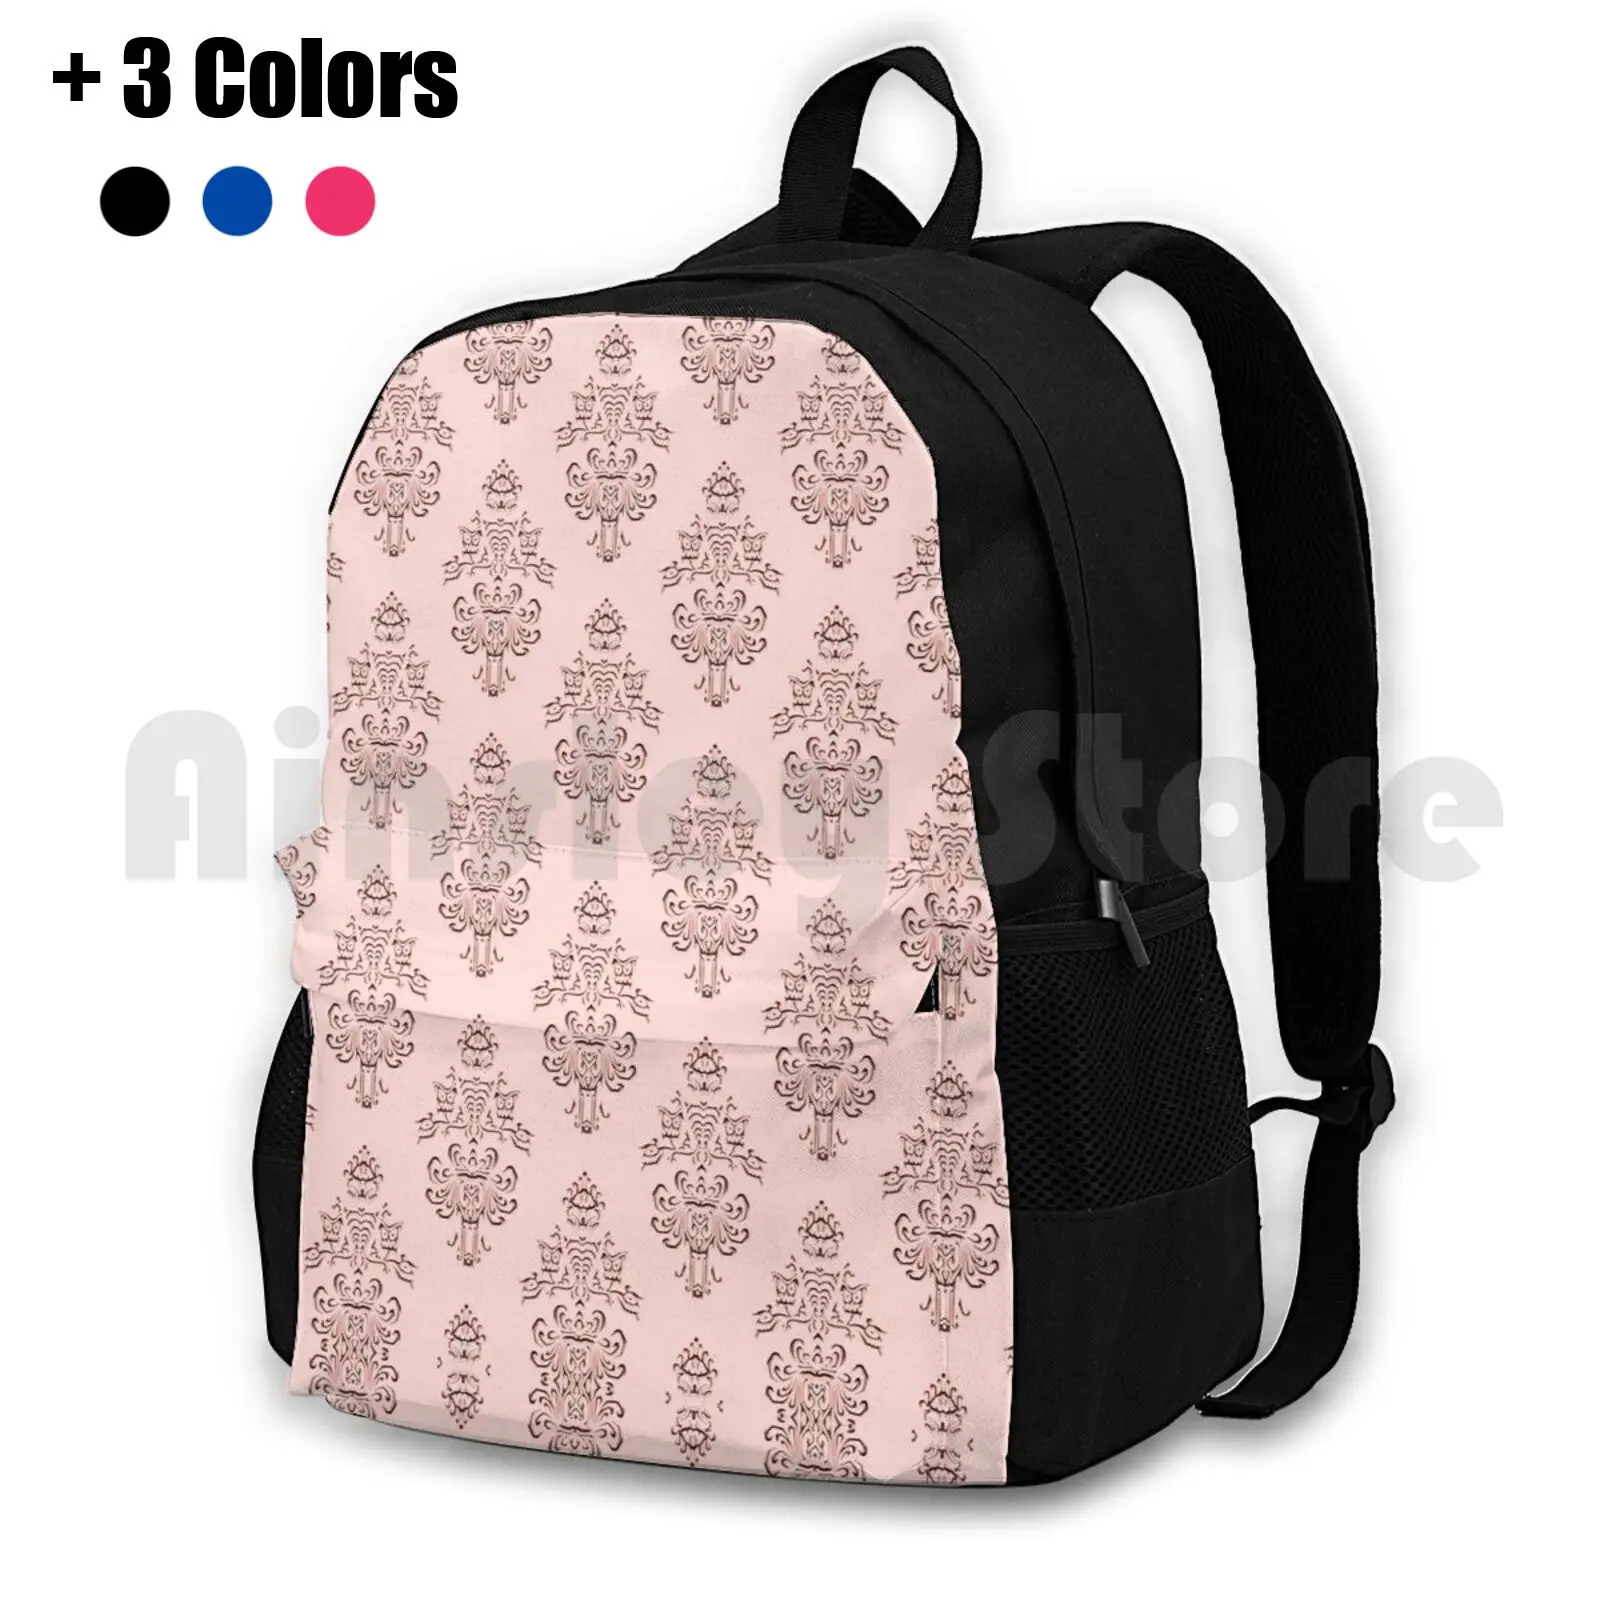 Rose Gold Haunted Mansion Wallpaper Carving Outdoor Hiking Backpack Waterproof Camping Travel Haunted Mansion World Magic